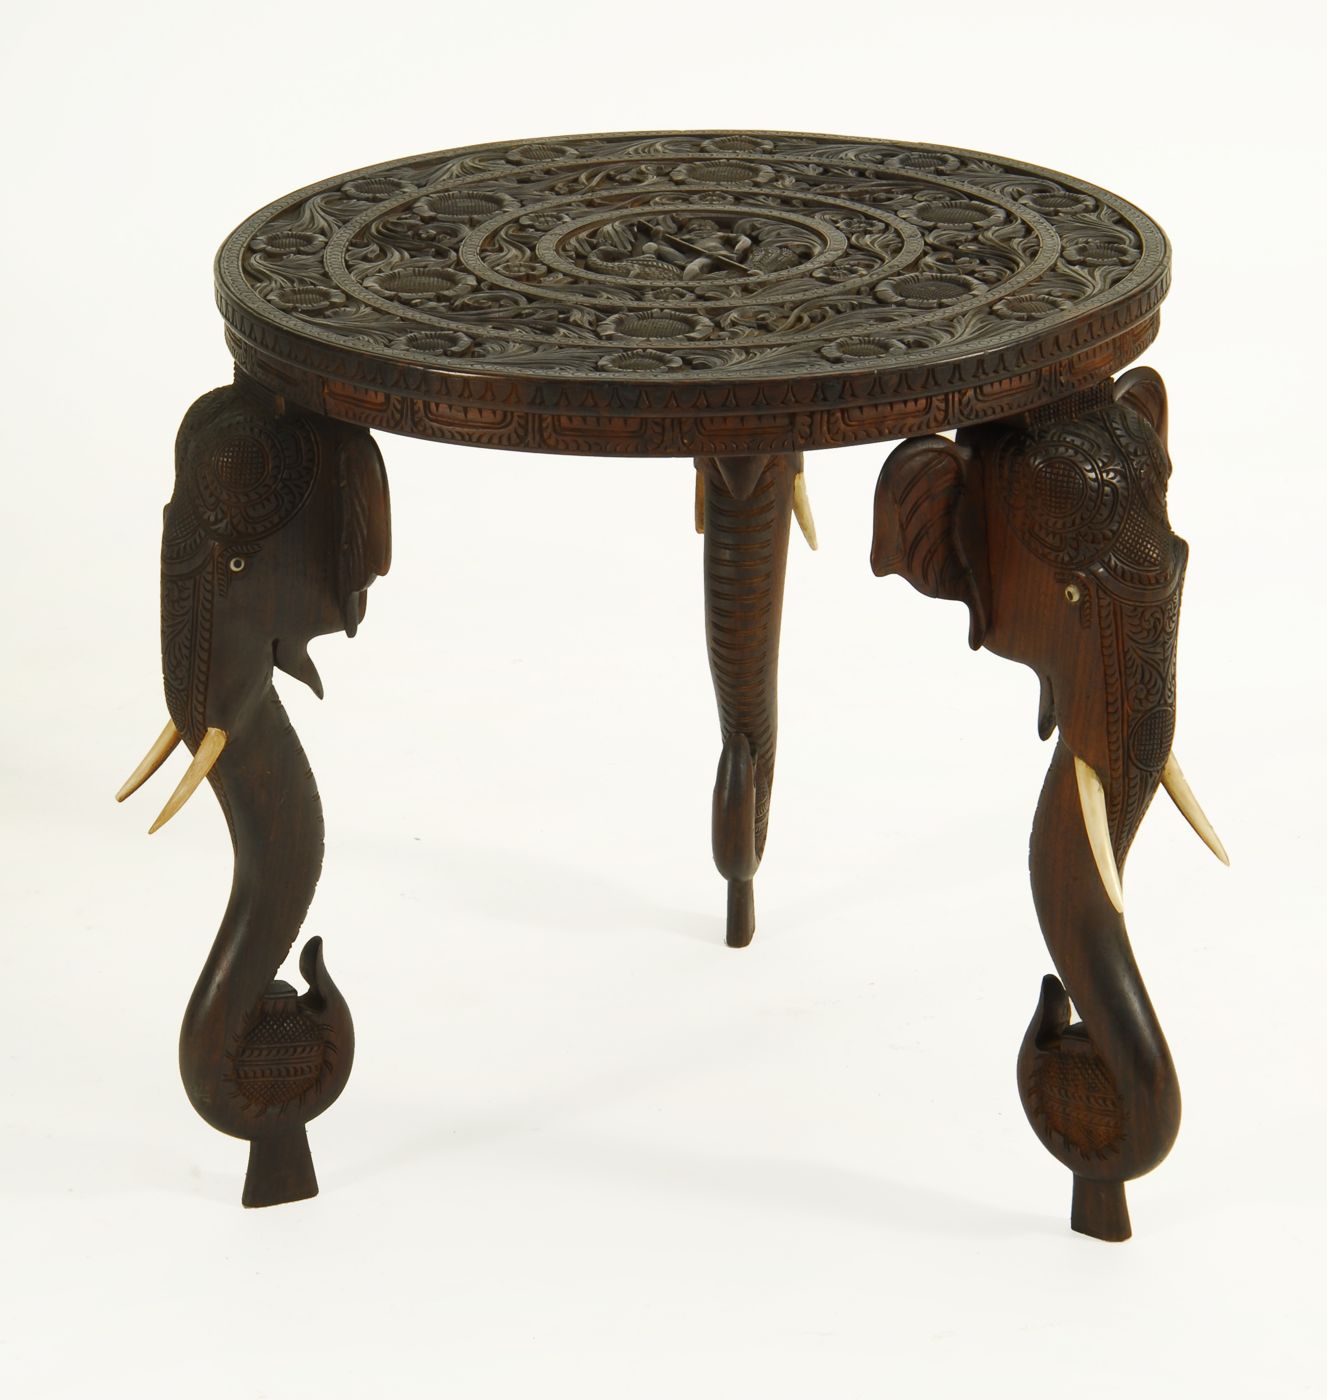 ANGLO-INDIAN ROUND CENTER TABLE